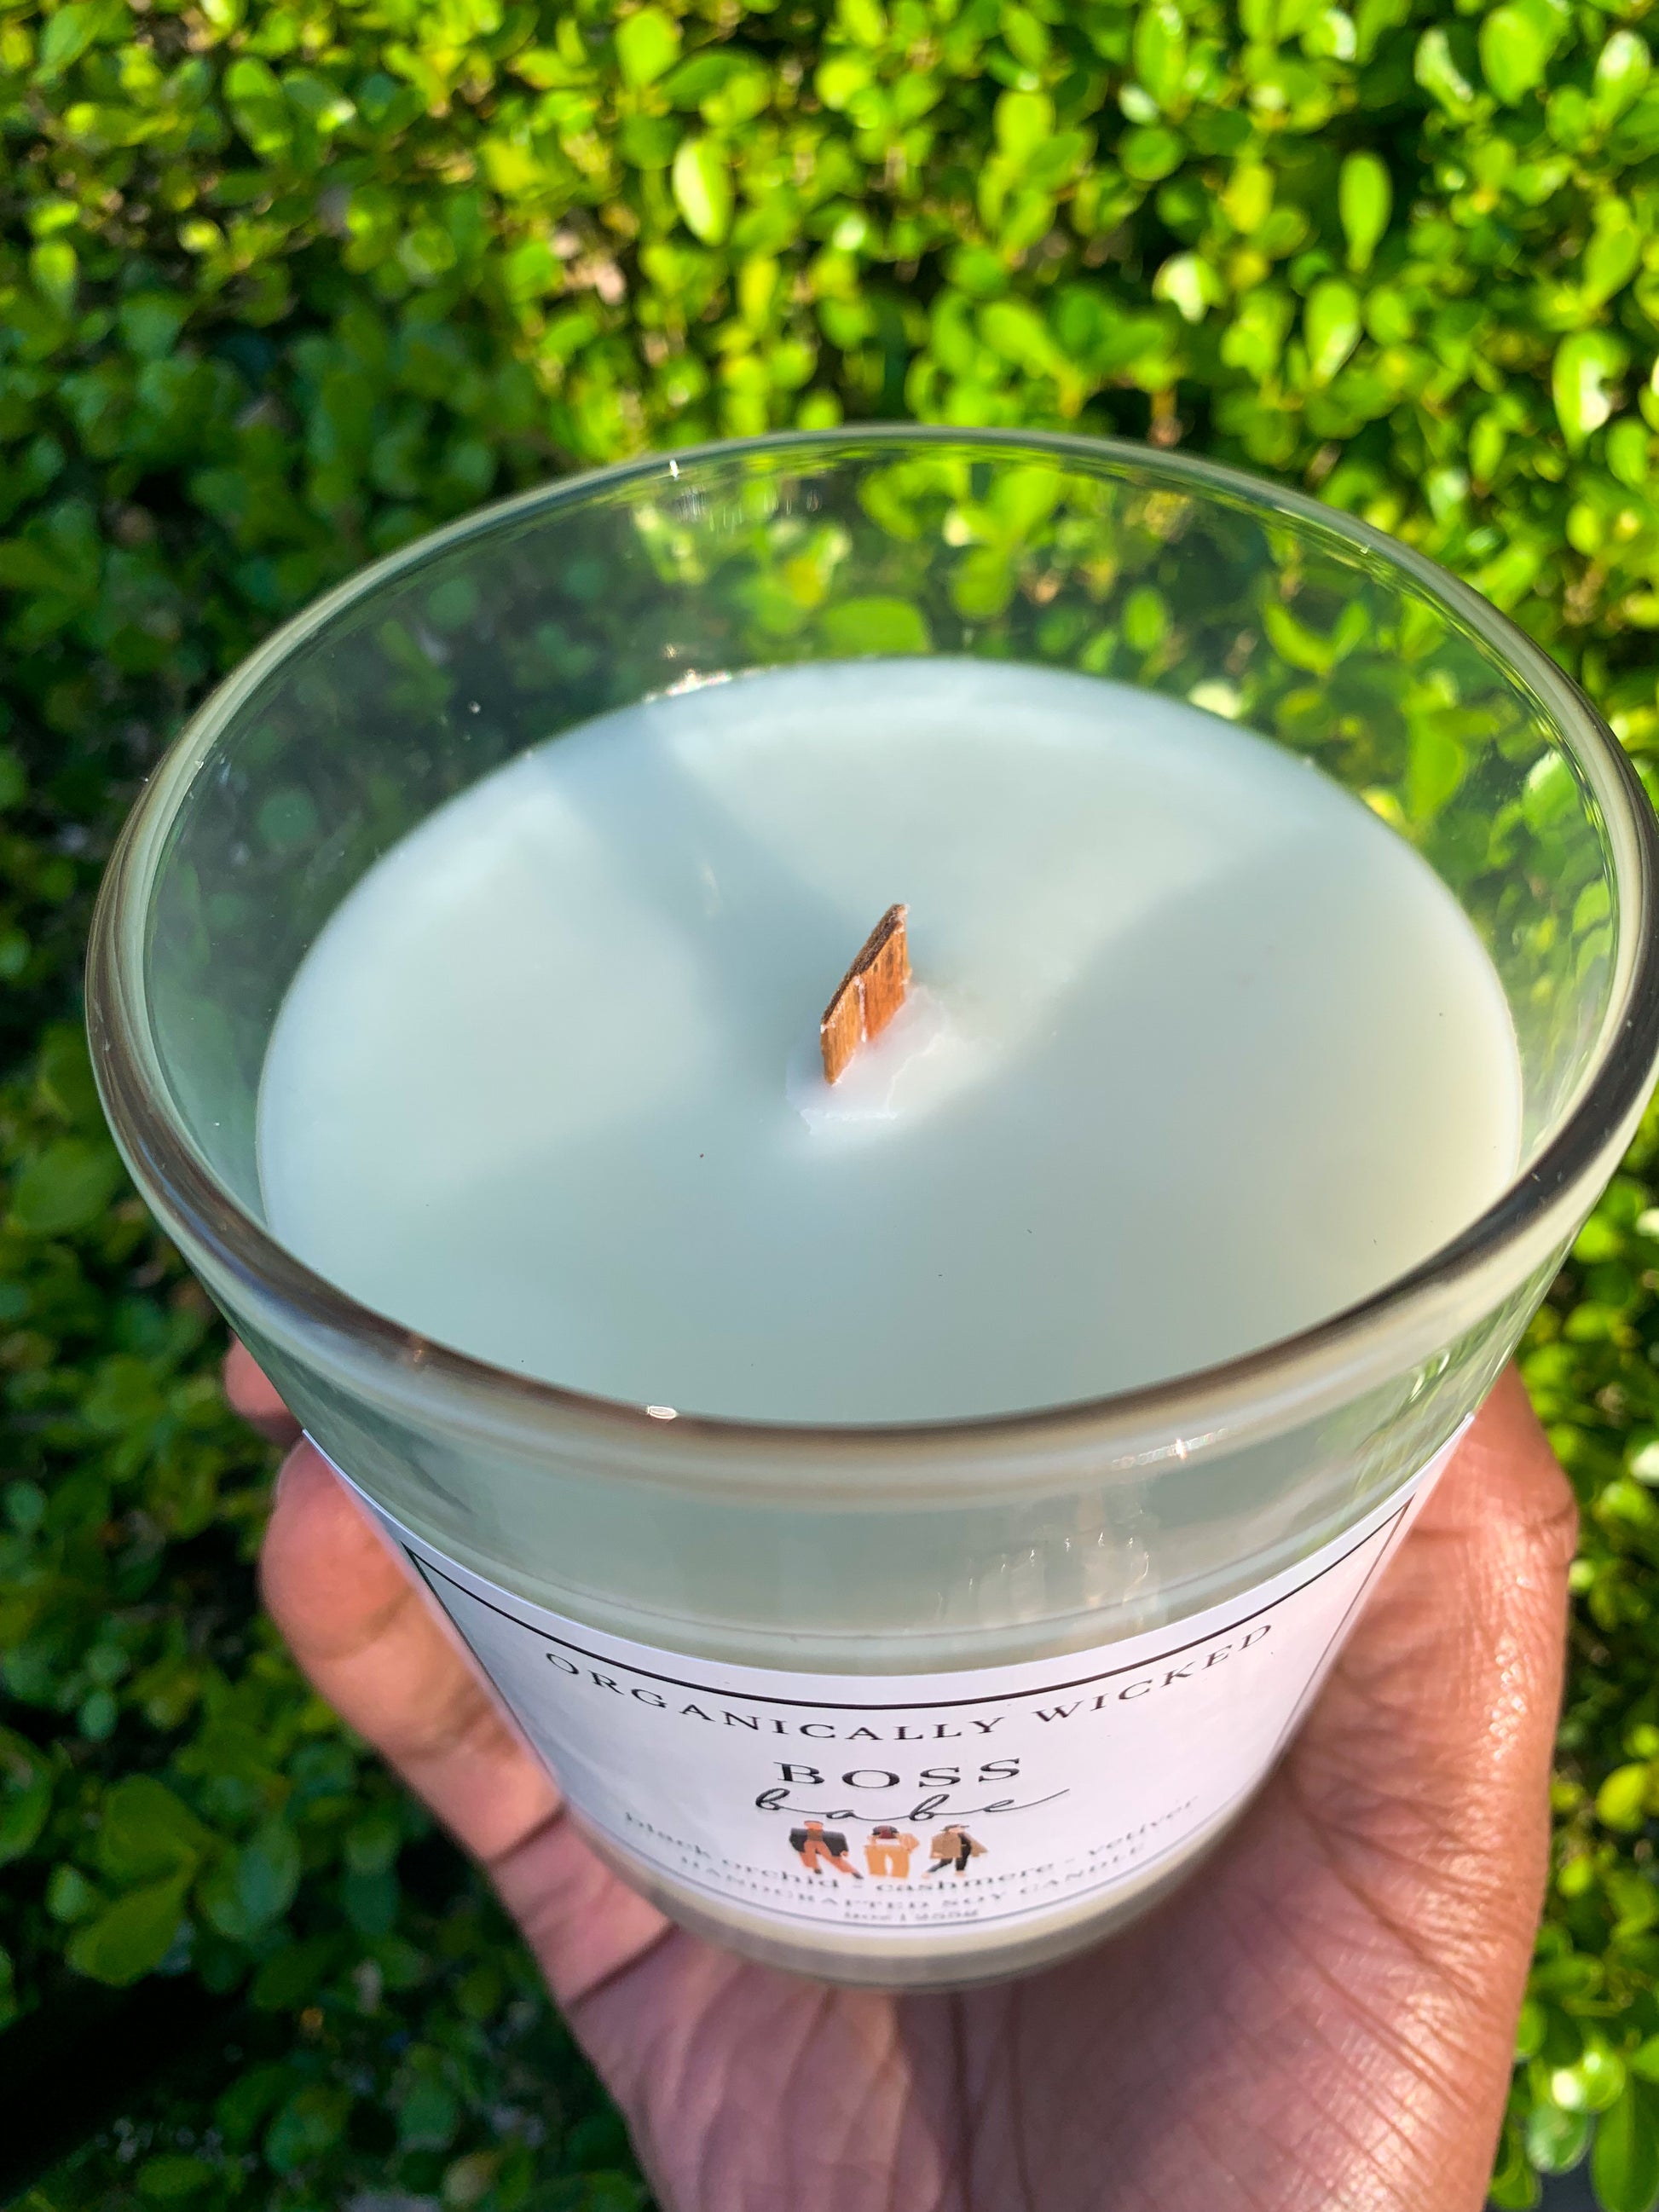 Cocoa butter Cashmere Wood Wick Candle, Crackling Wood Wick Soy Candle,  Wood Wick 9 oz Candle, Cocoa butter Cashmere Candle, Candle Gifts